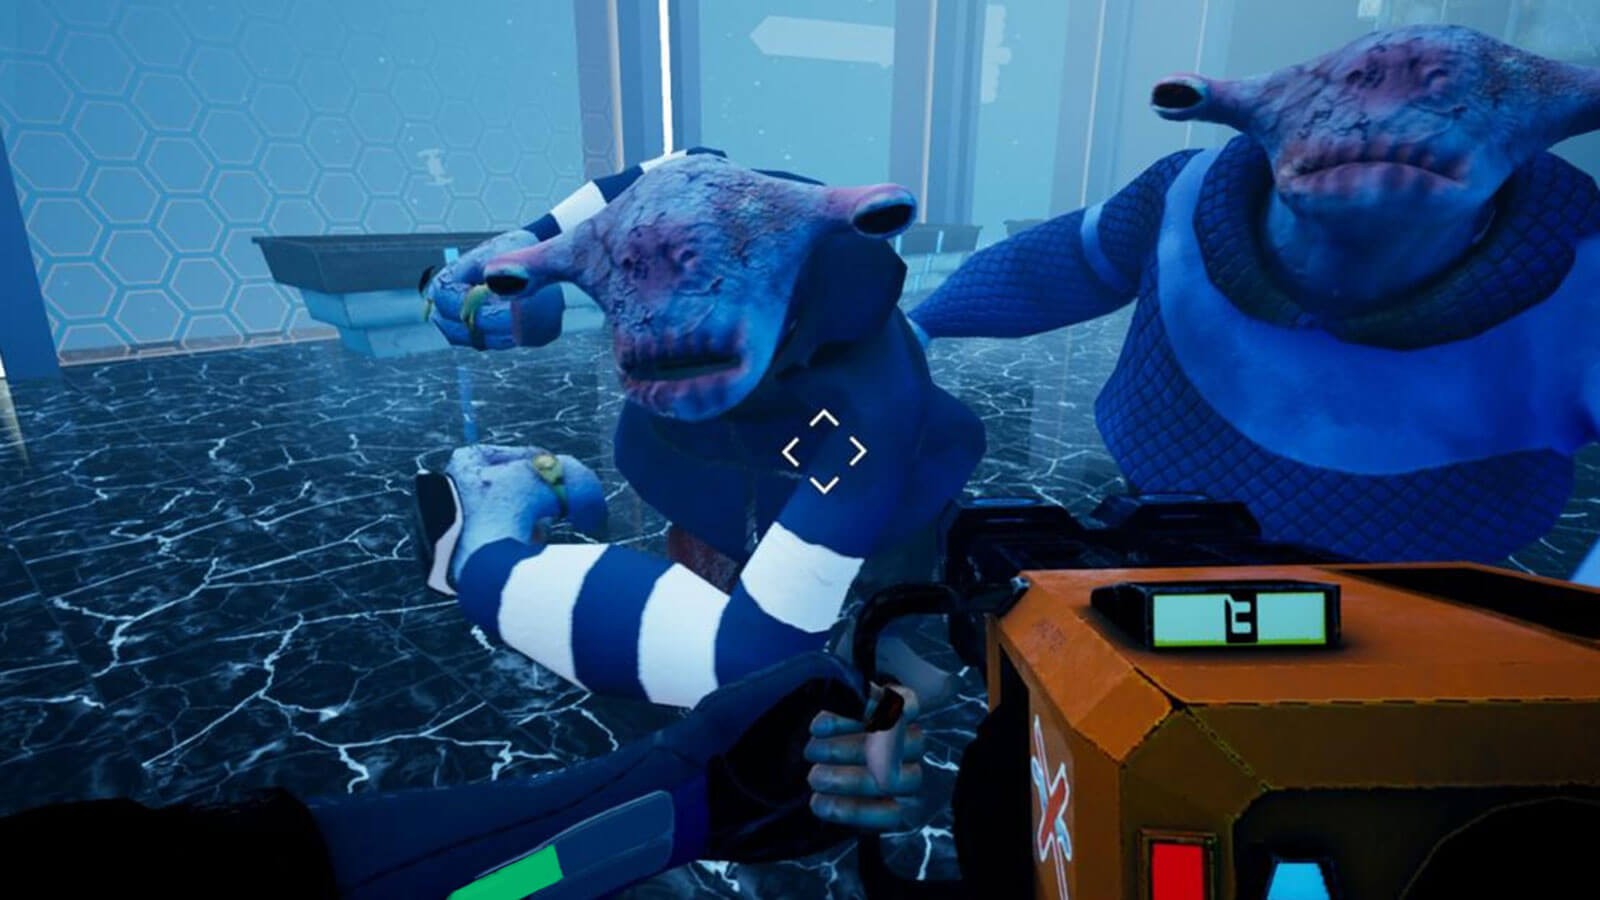 Two aliens wearing sweaters attack a player holding a rocket launcher device